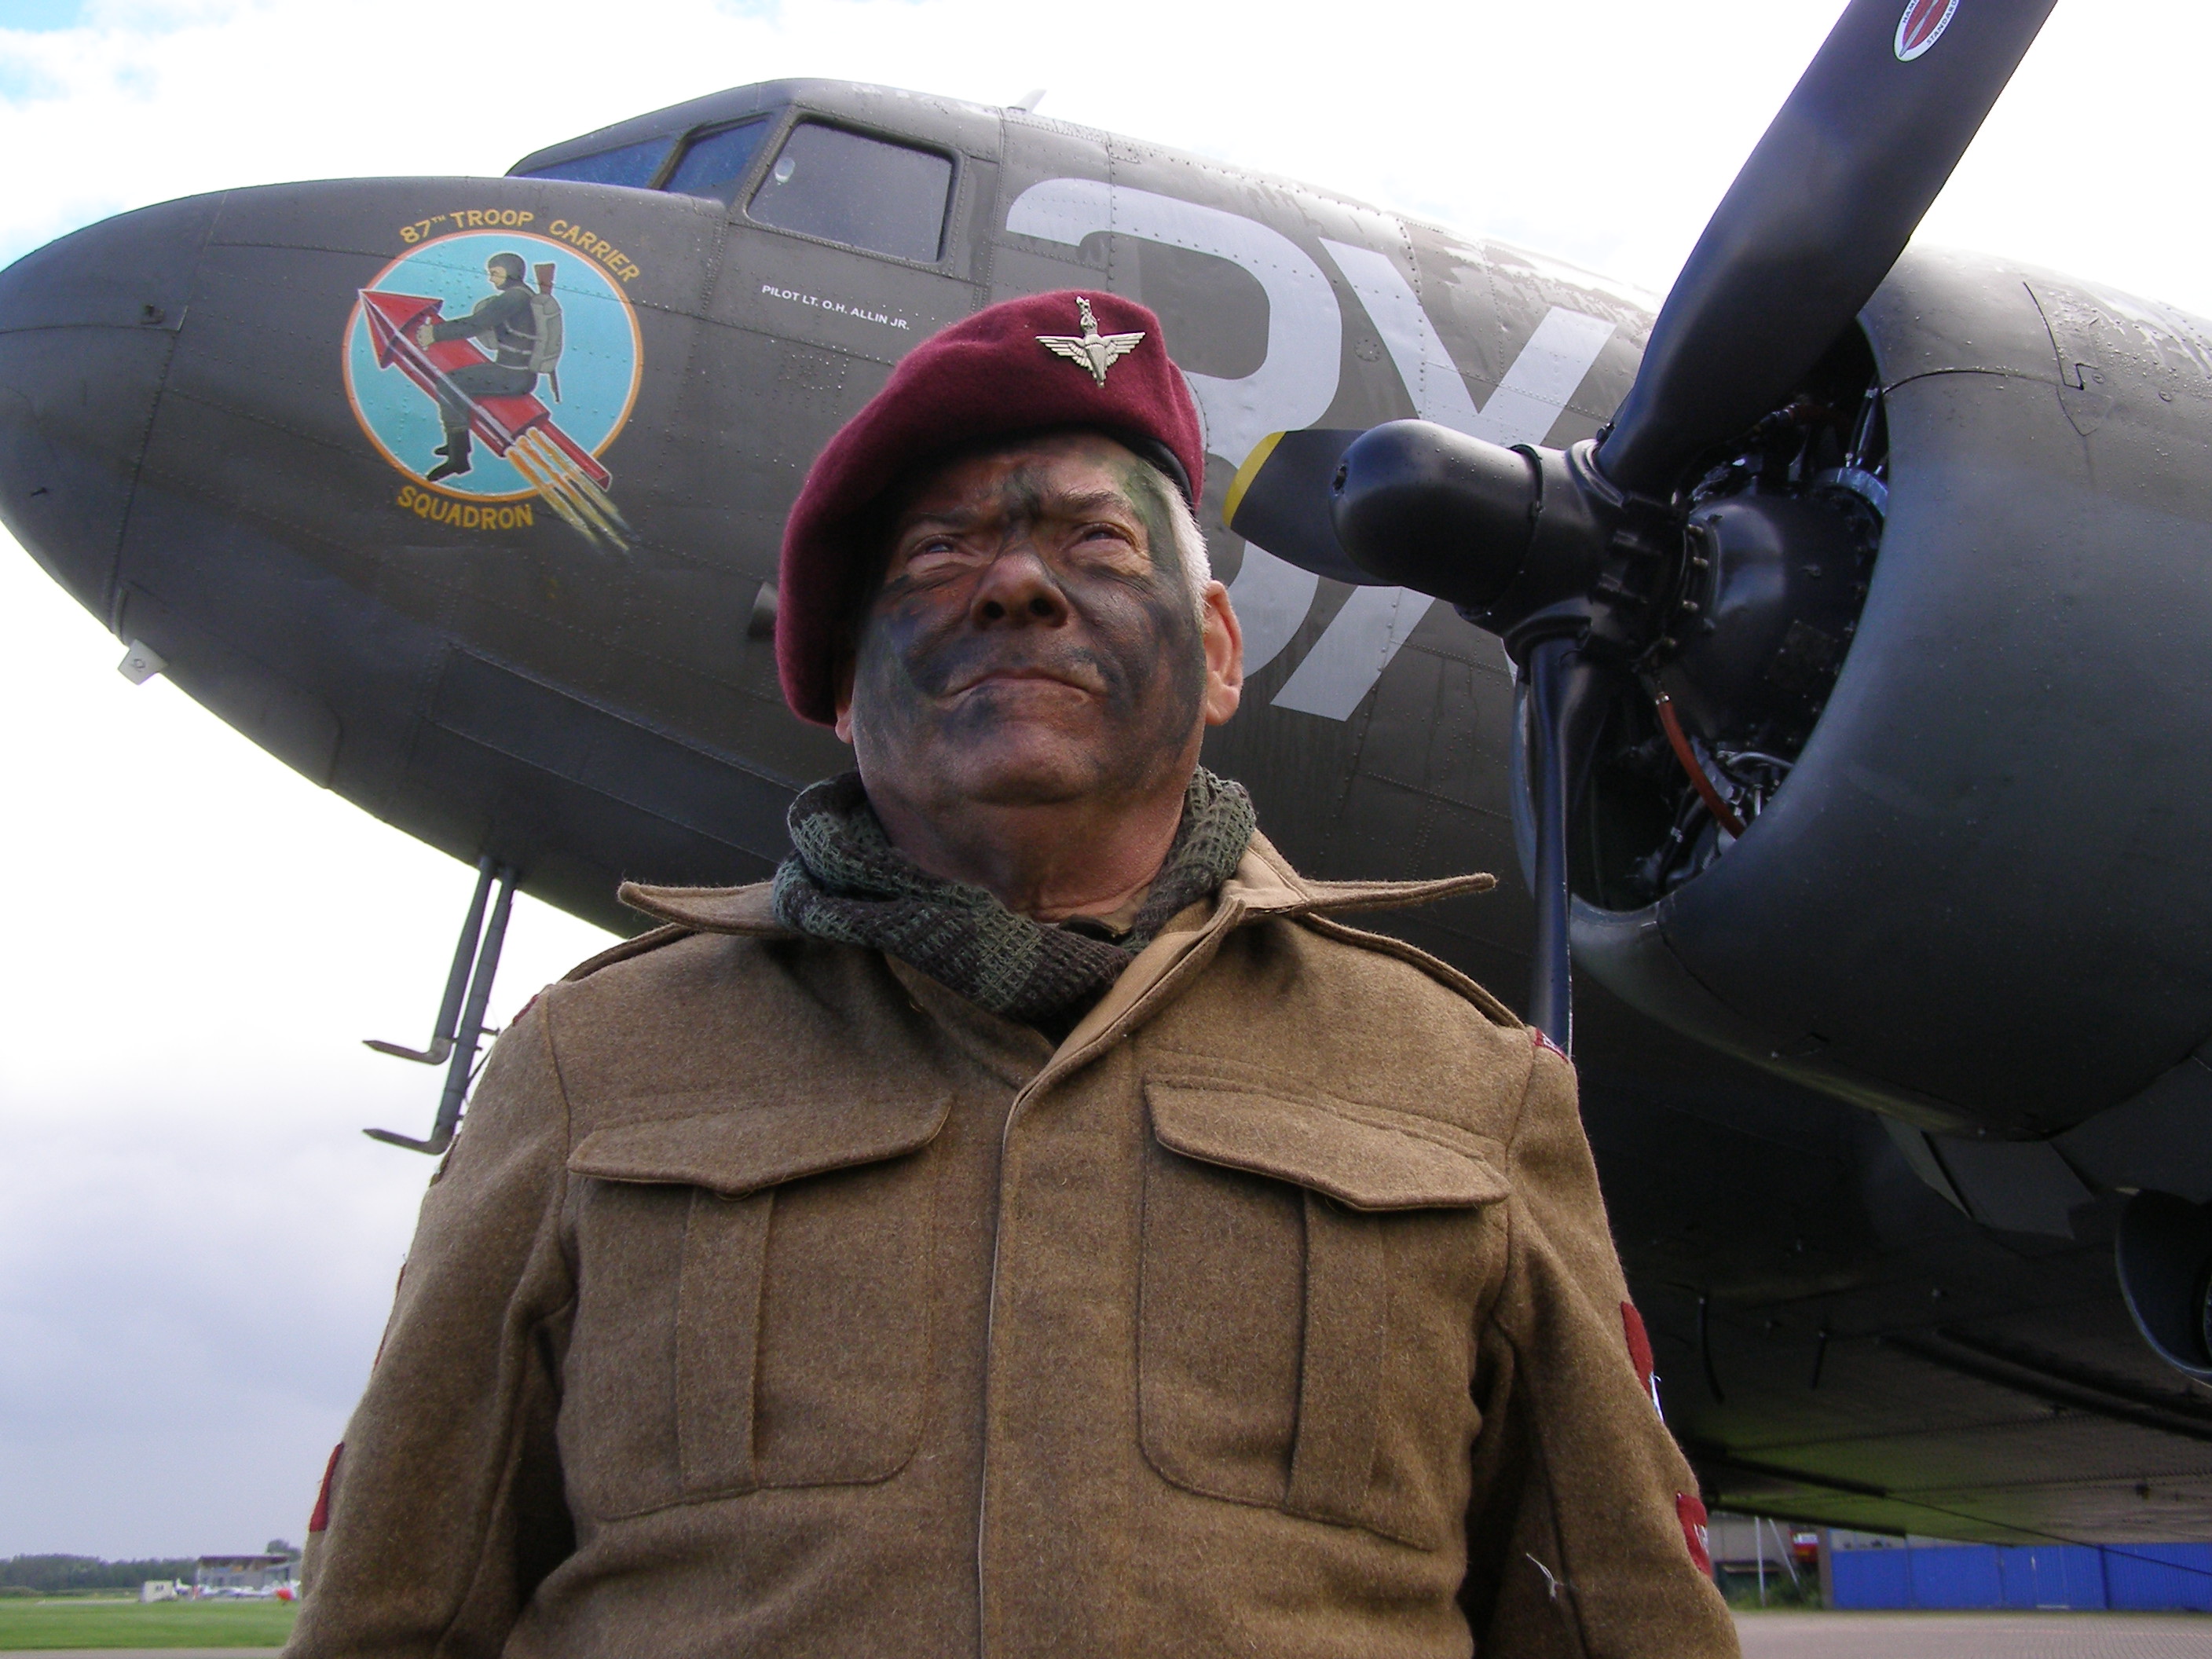 Author one hour after his Operation Market Garden commemoration parachute jump September 17, 2010 on the Arnhem Battlefield, Netherlands. Our C-47, background, had 60 WW2 German bullet holes along the right side, all patched.